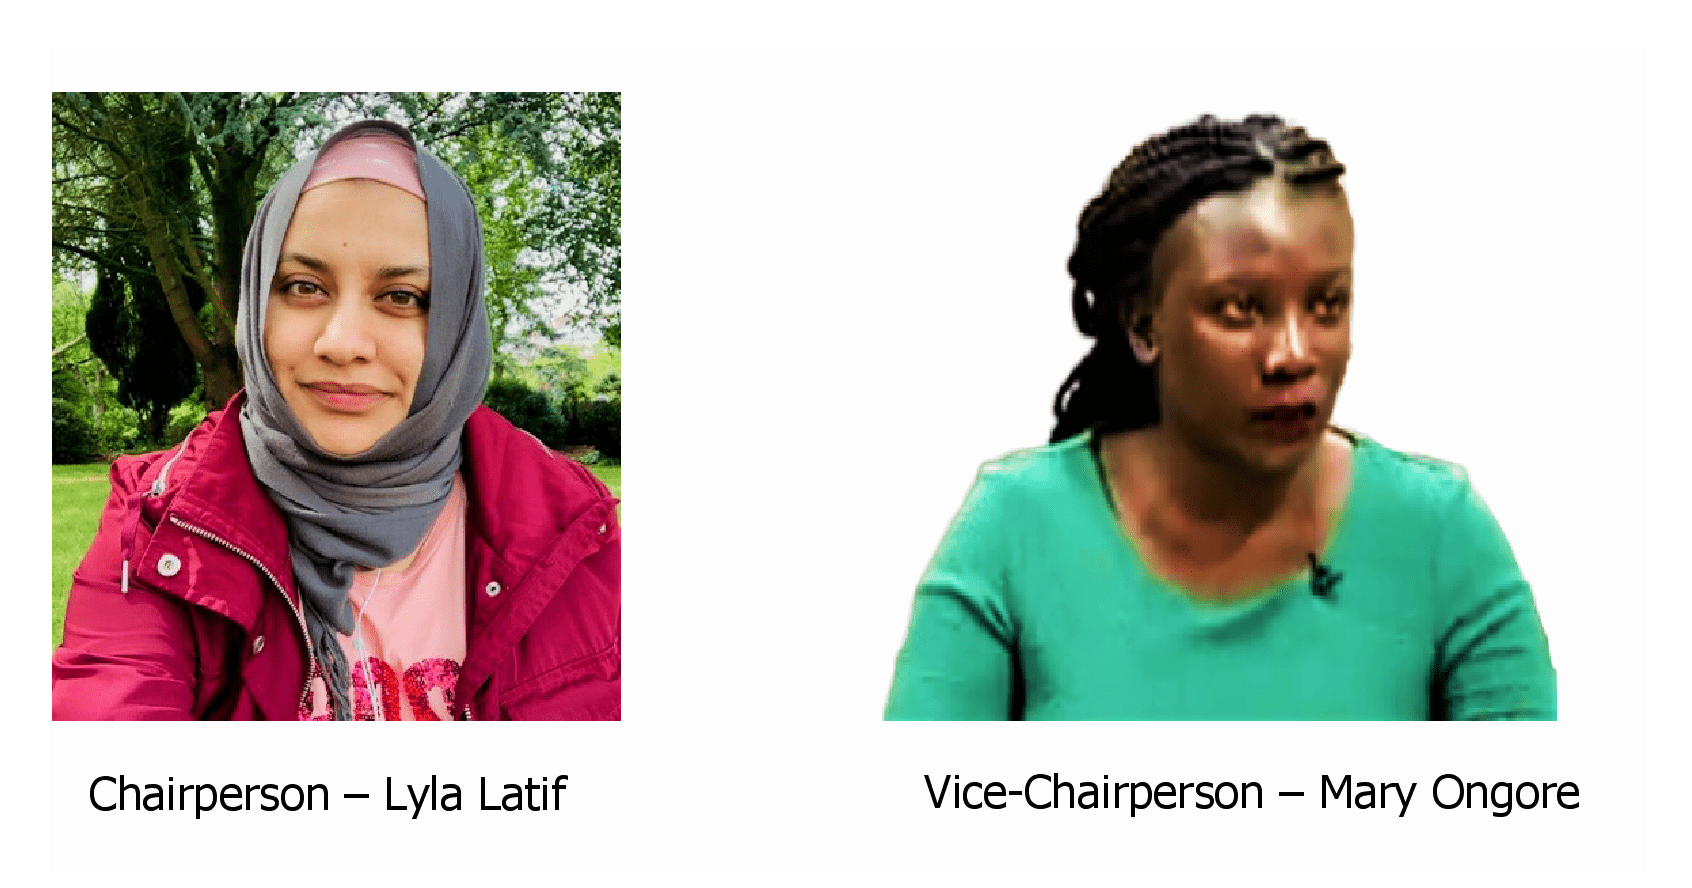 Lyla Latif (left) and Mary Ongore (right)